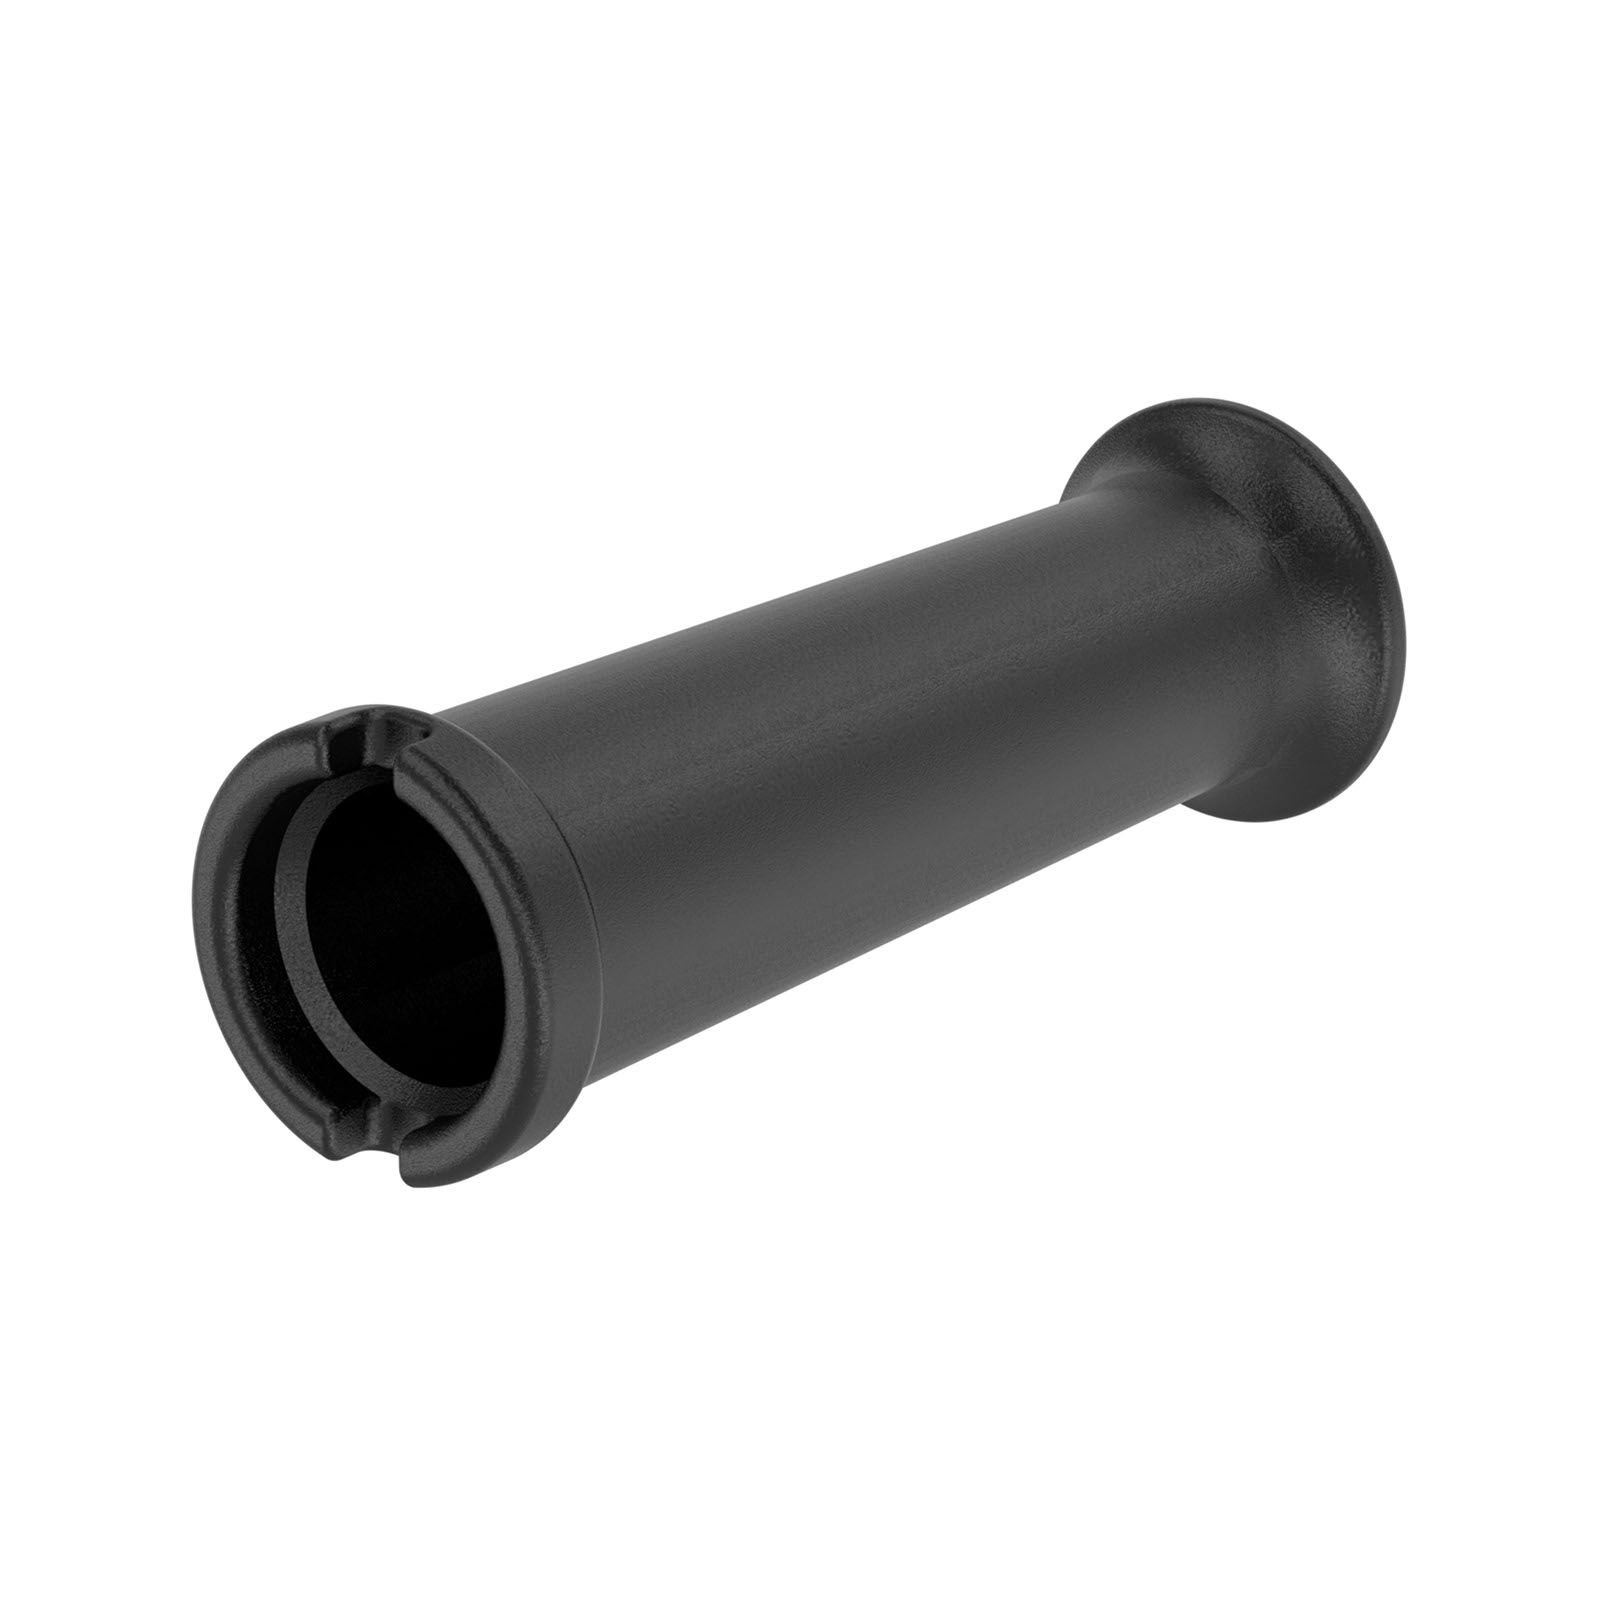 Support handle - LBB45 productfoto